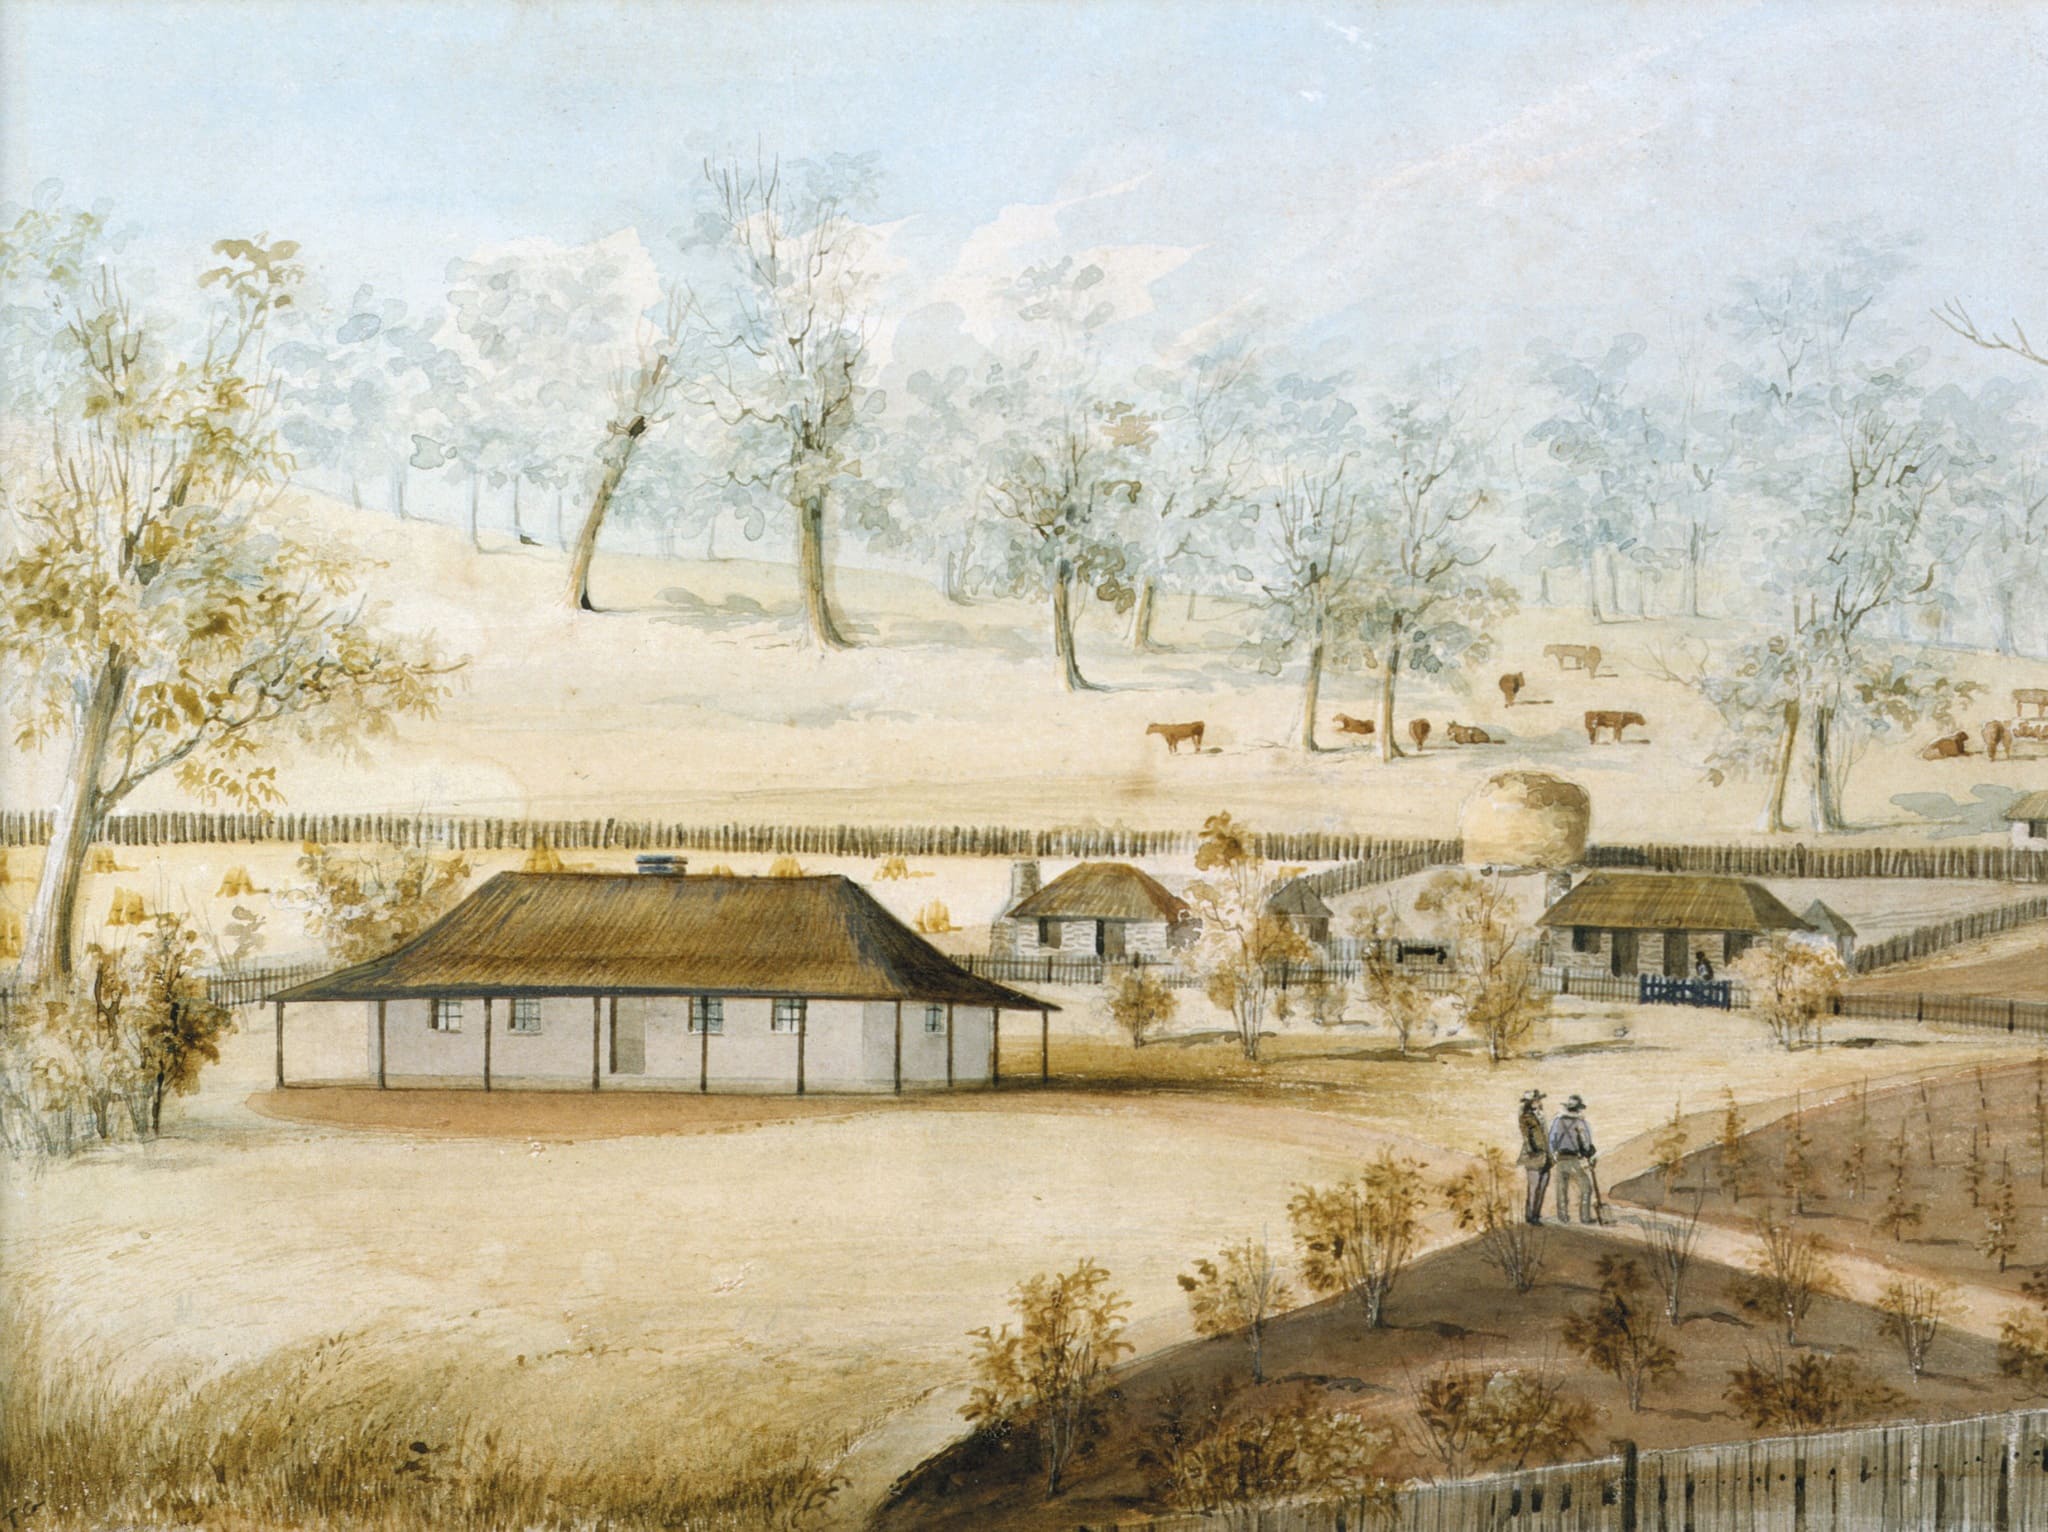 Painting of early settlement at Bungaree by colonial artist, ST Gill